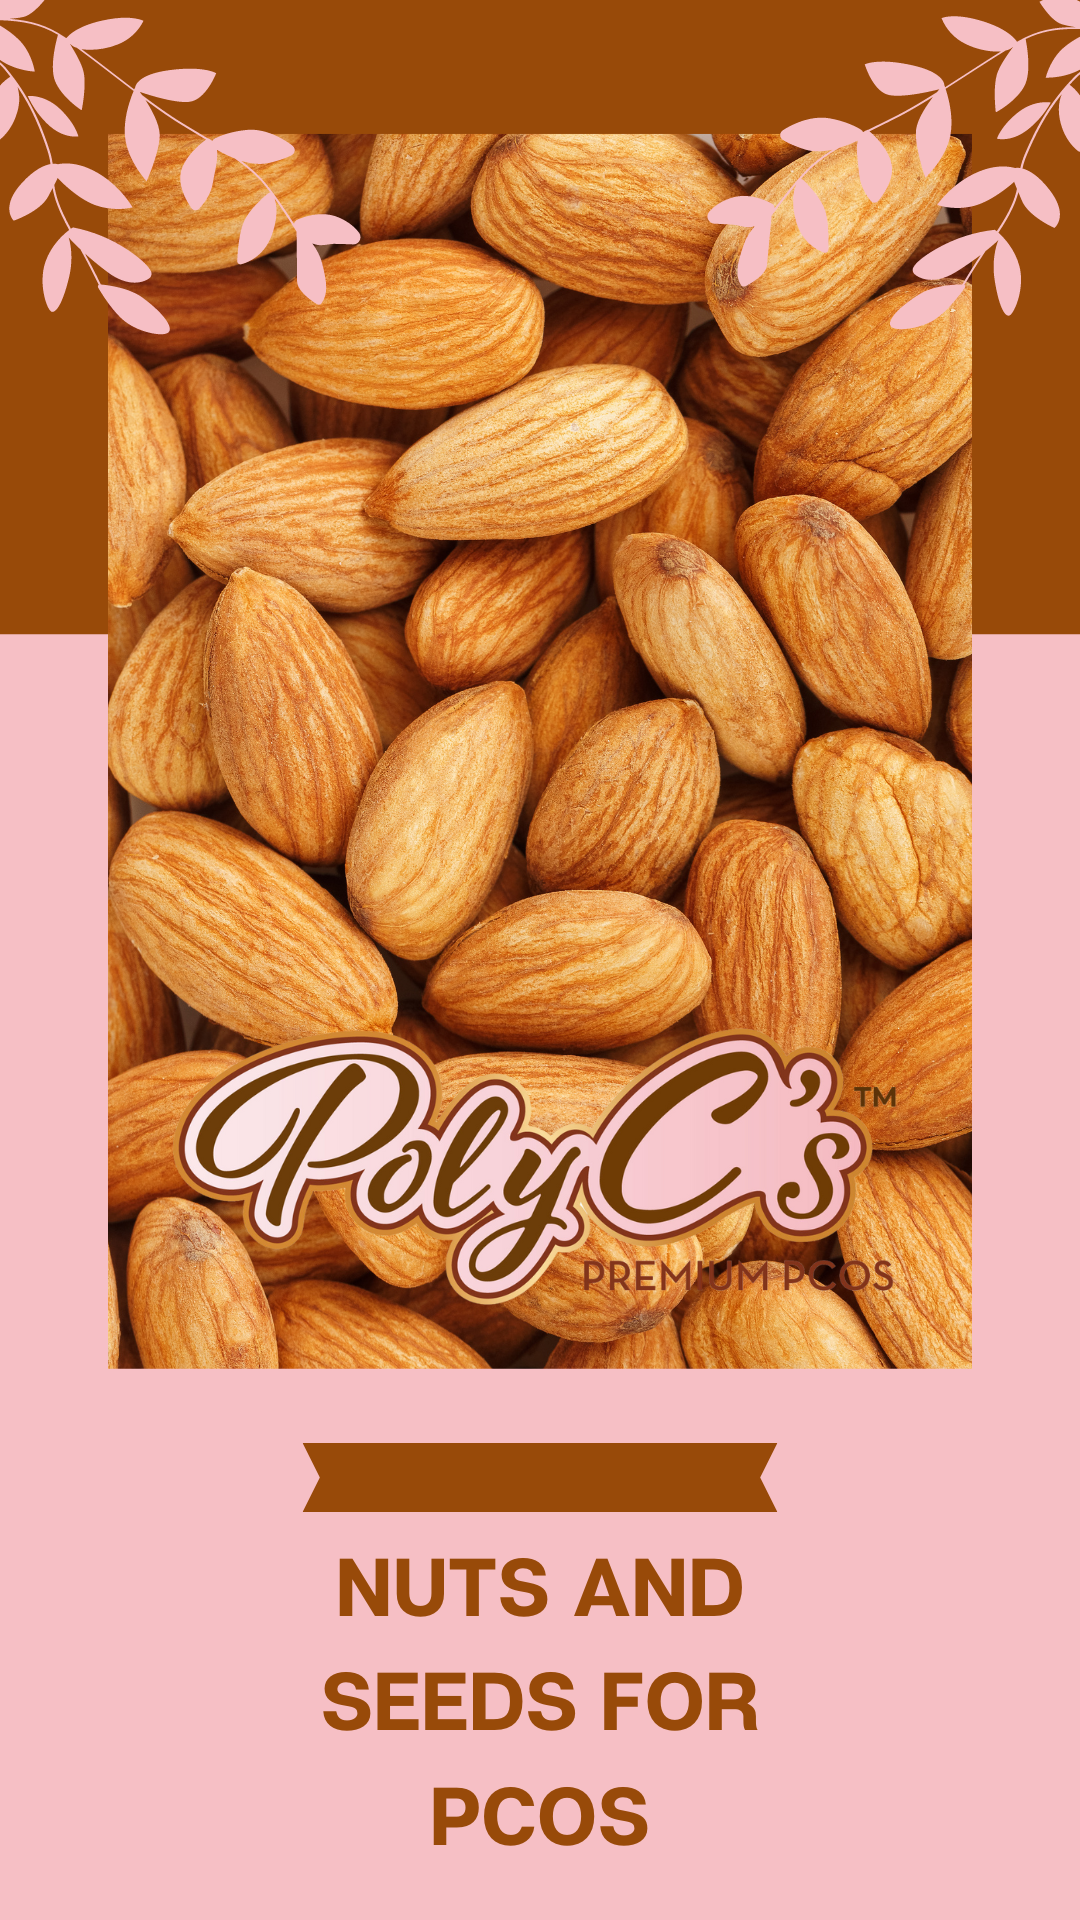 Nuts and Seeds for PCOS